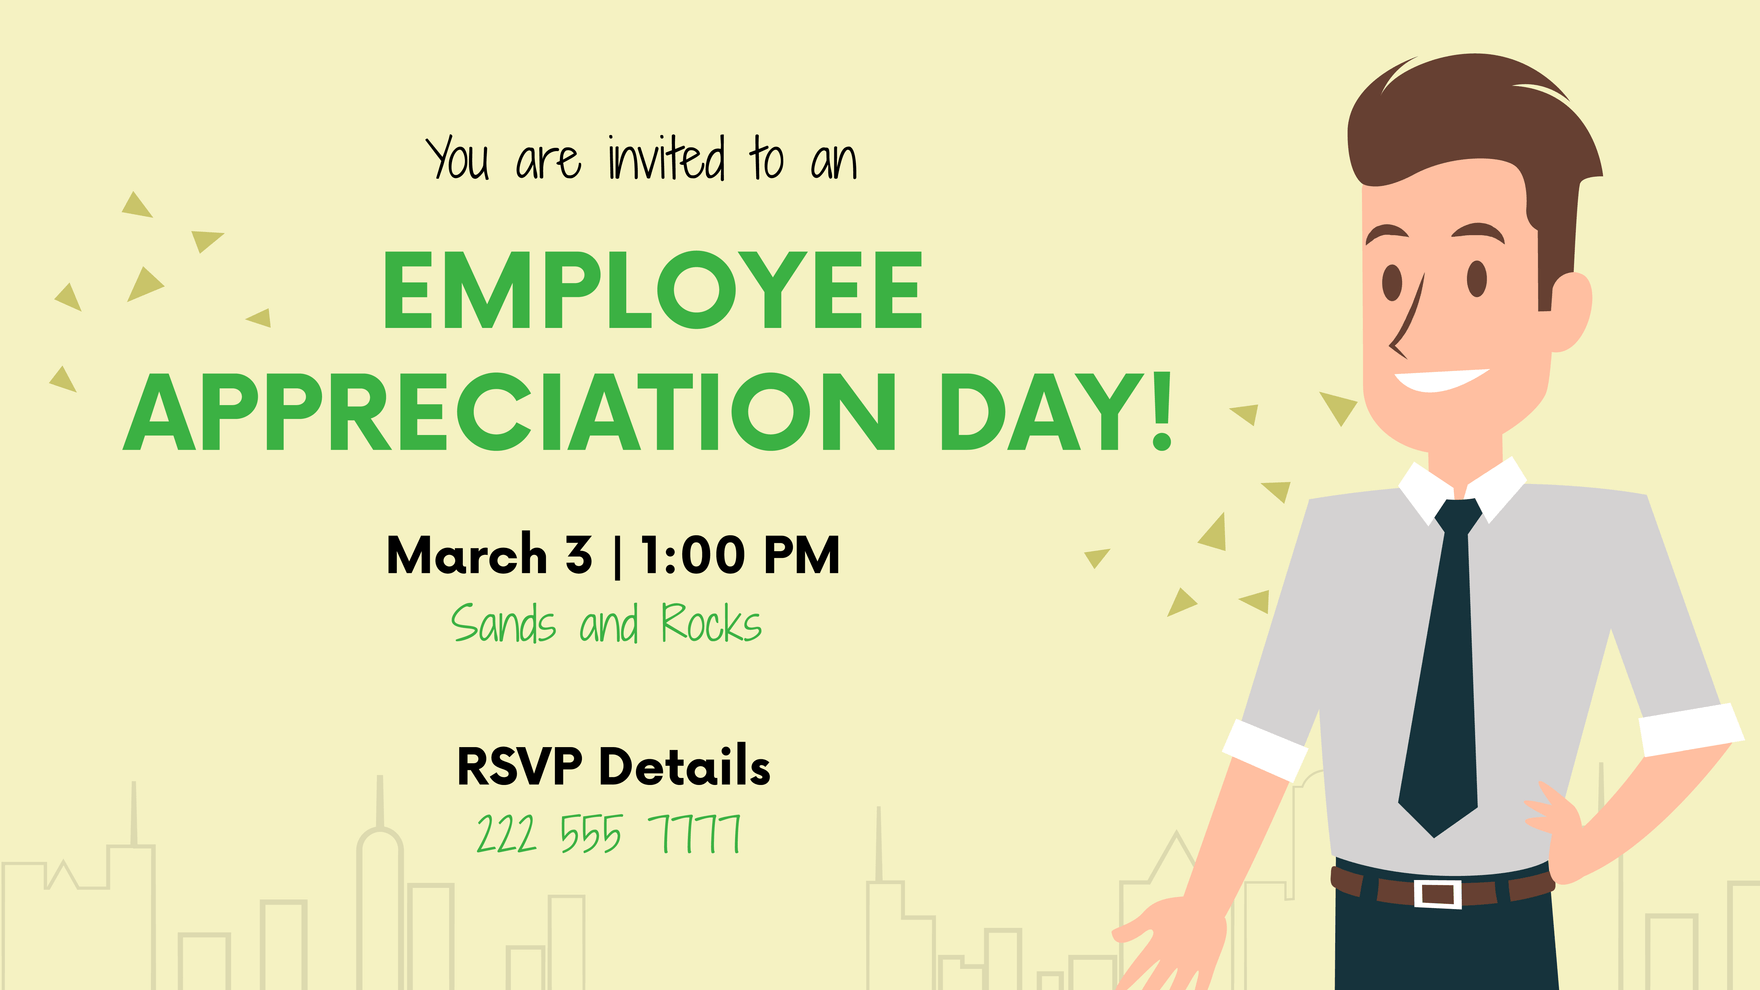 Free Employee Appreciation Day Invitation Background in Illustrator, PSD, EPS, SVG, JPG, PNG